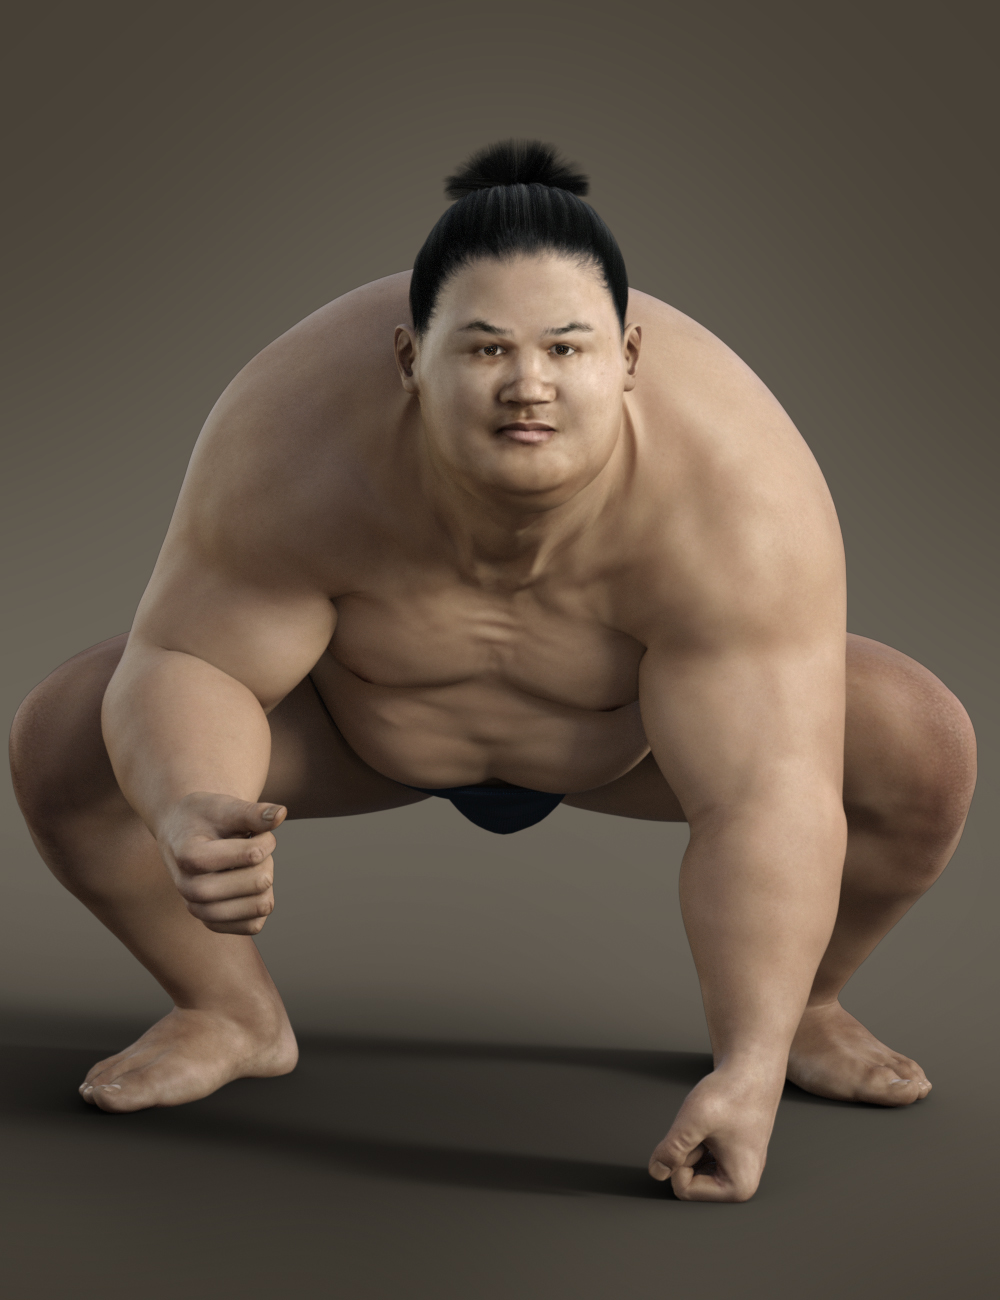 Sumo Novice for Sumo Character, Hair and Outfit for George and Genesis 3 Male by: Deepsea, 3D Models by Daz 3D